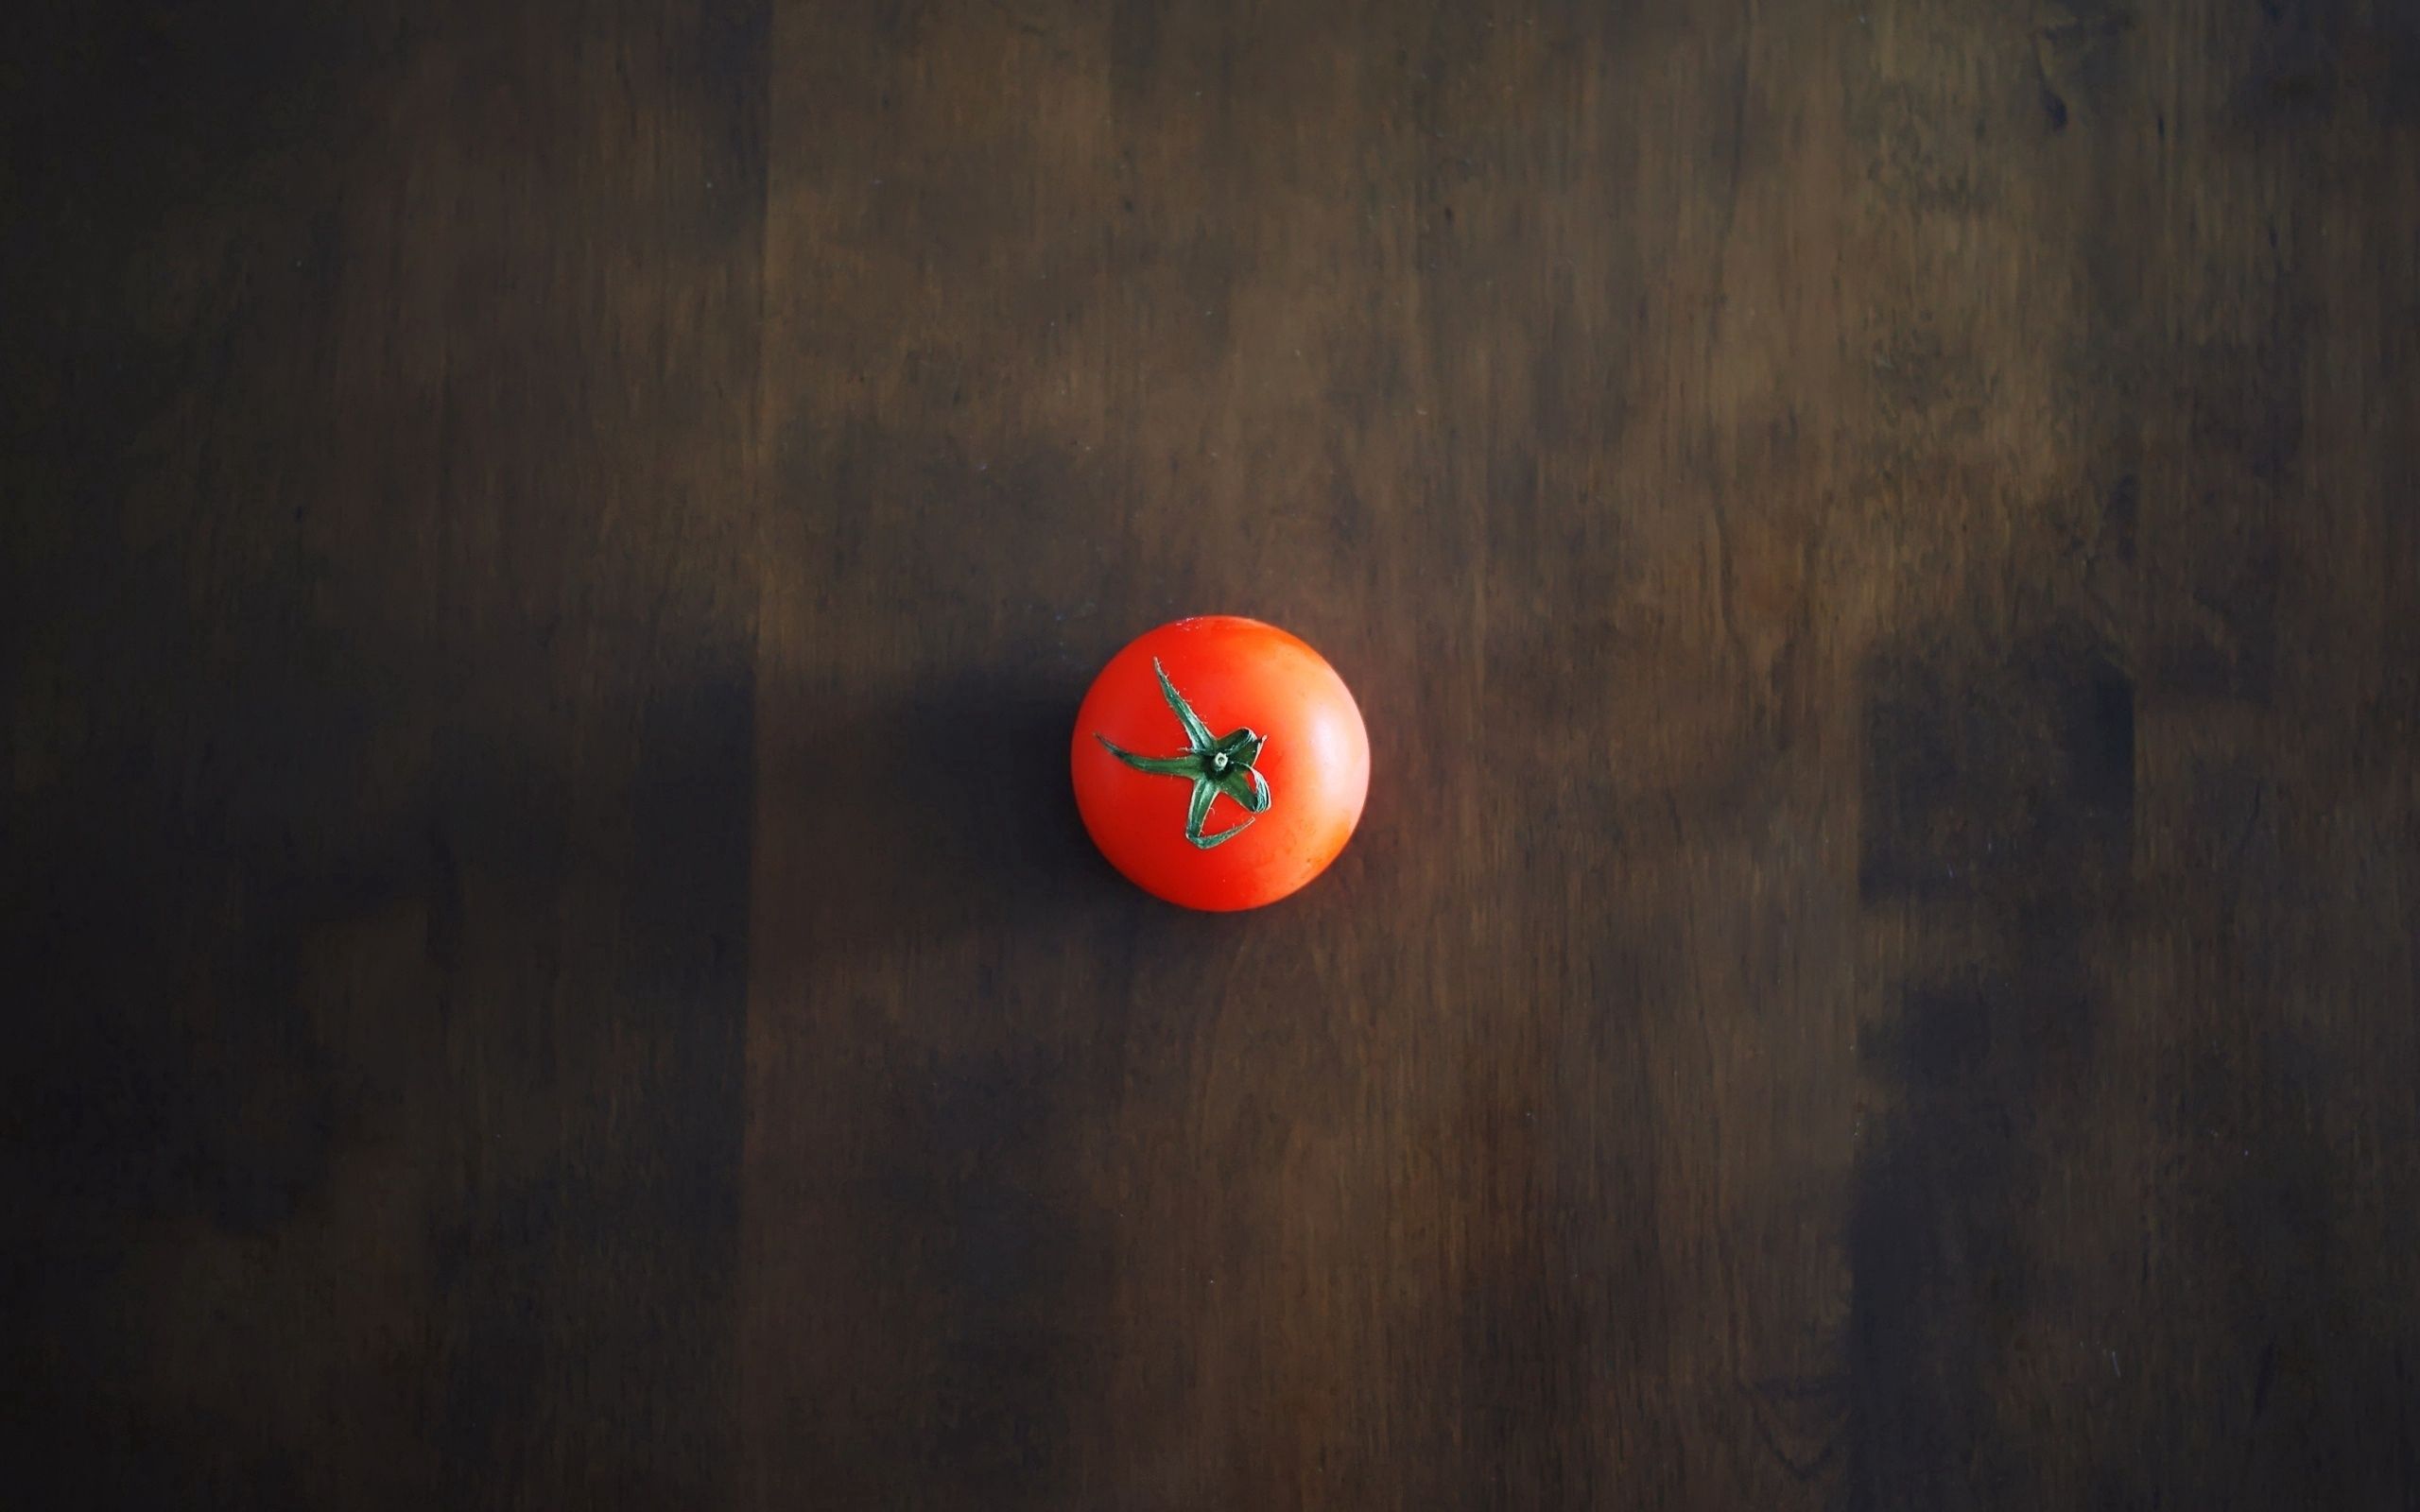 2560x1600 Wallpaper minimalism, tomato, red, table, wall, shadow, background